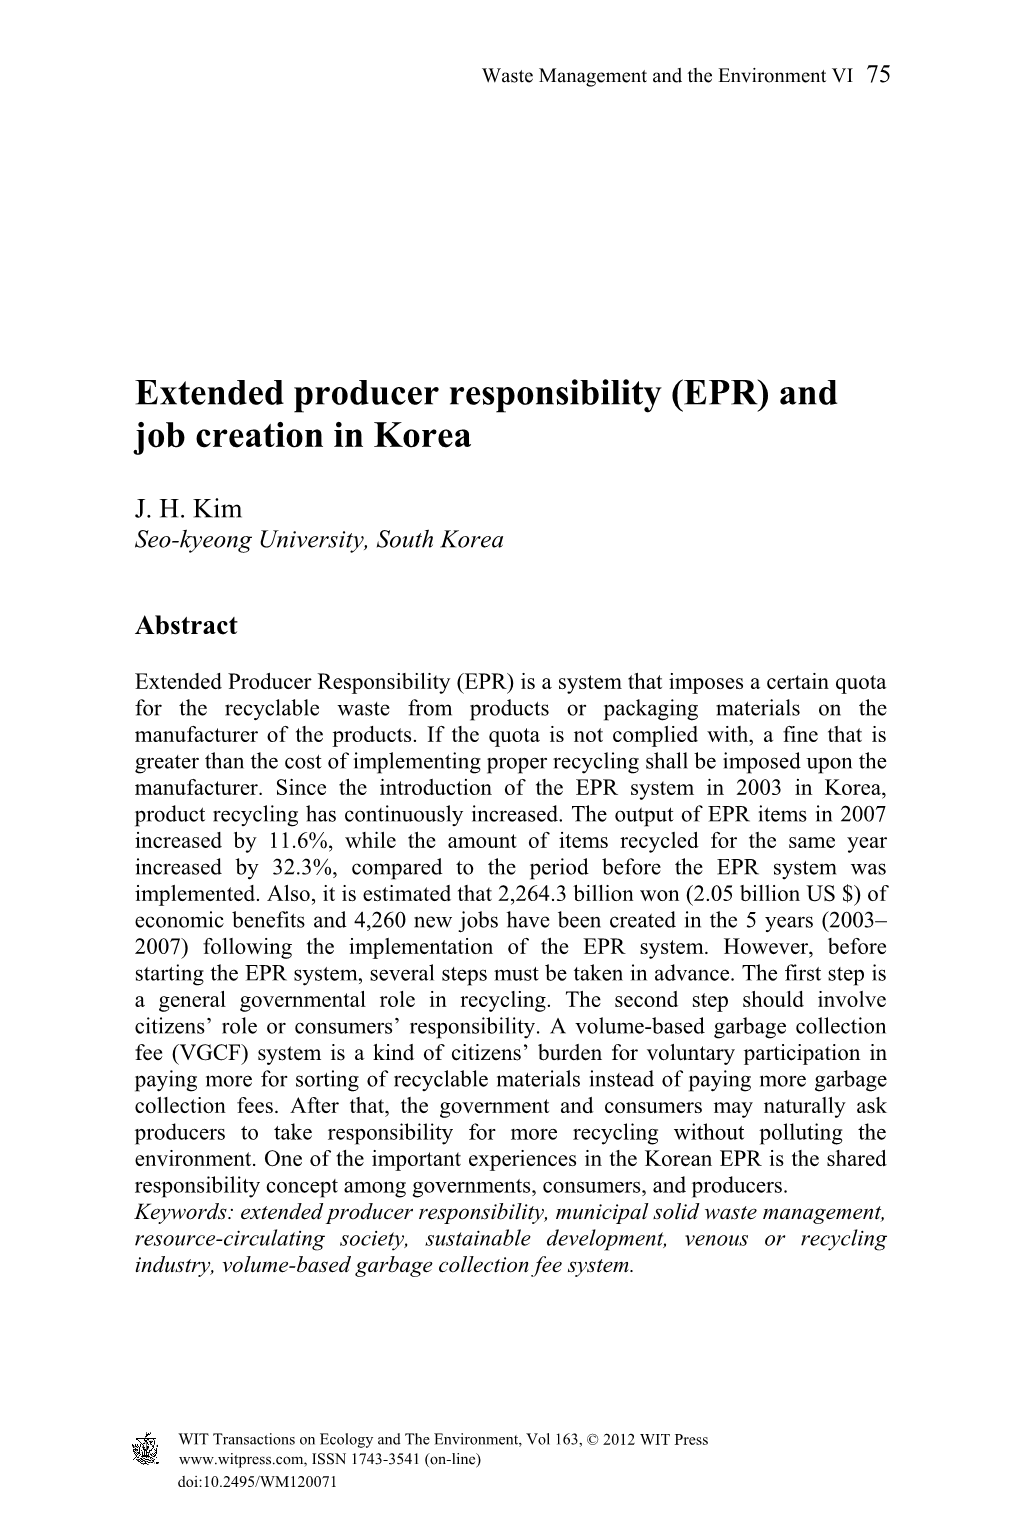 Extended Producer Responsibility (EPR) and Job Creation in Korea